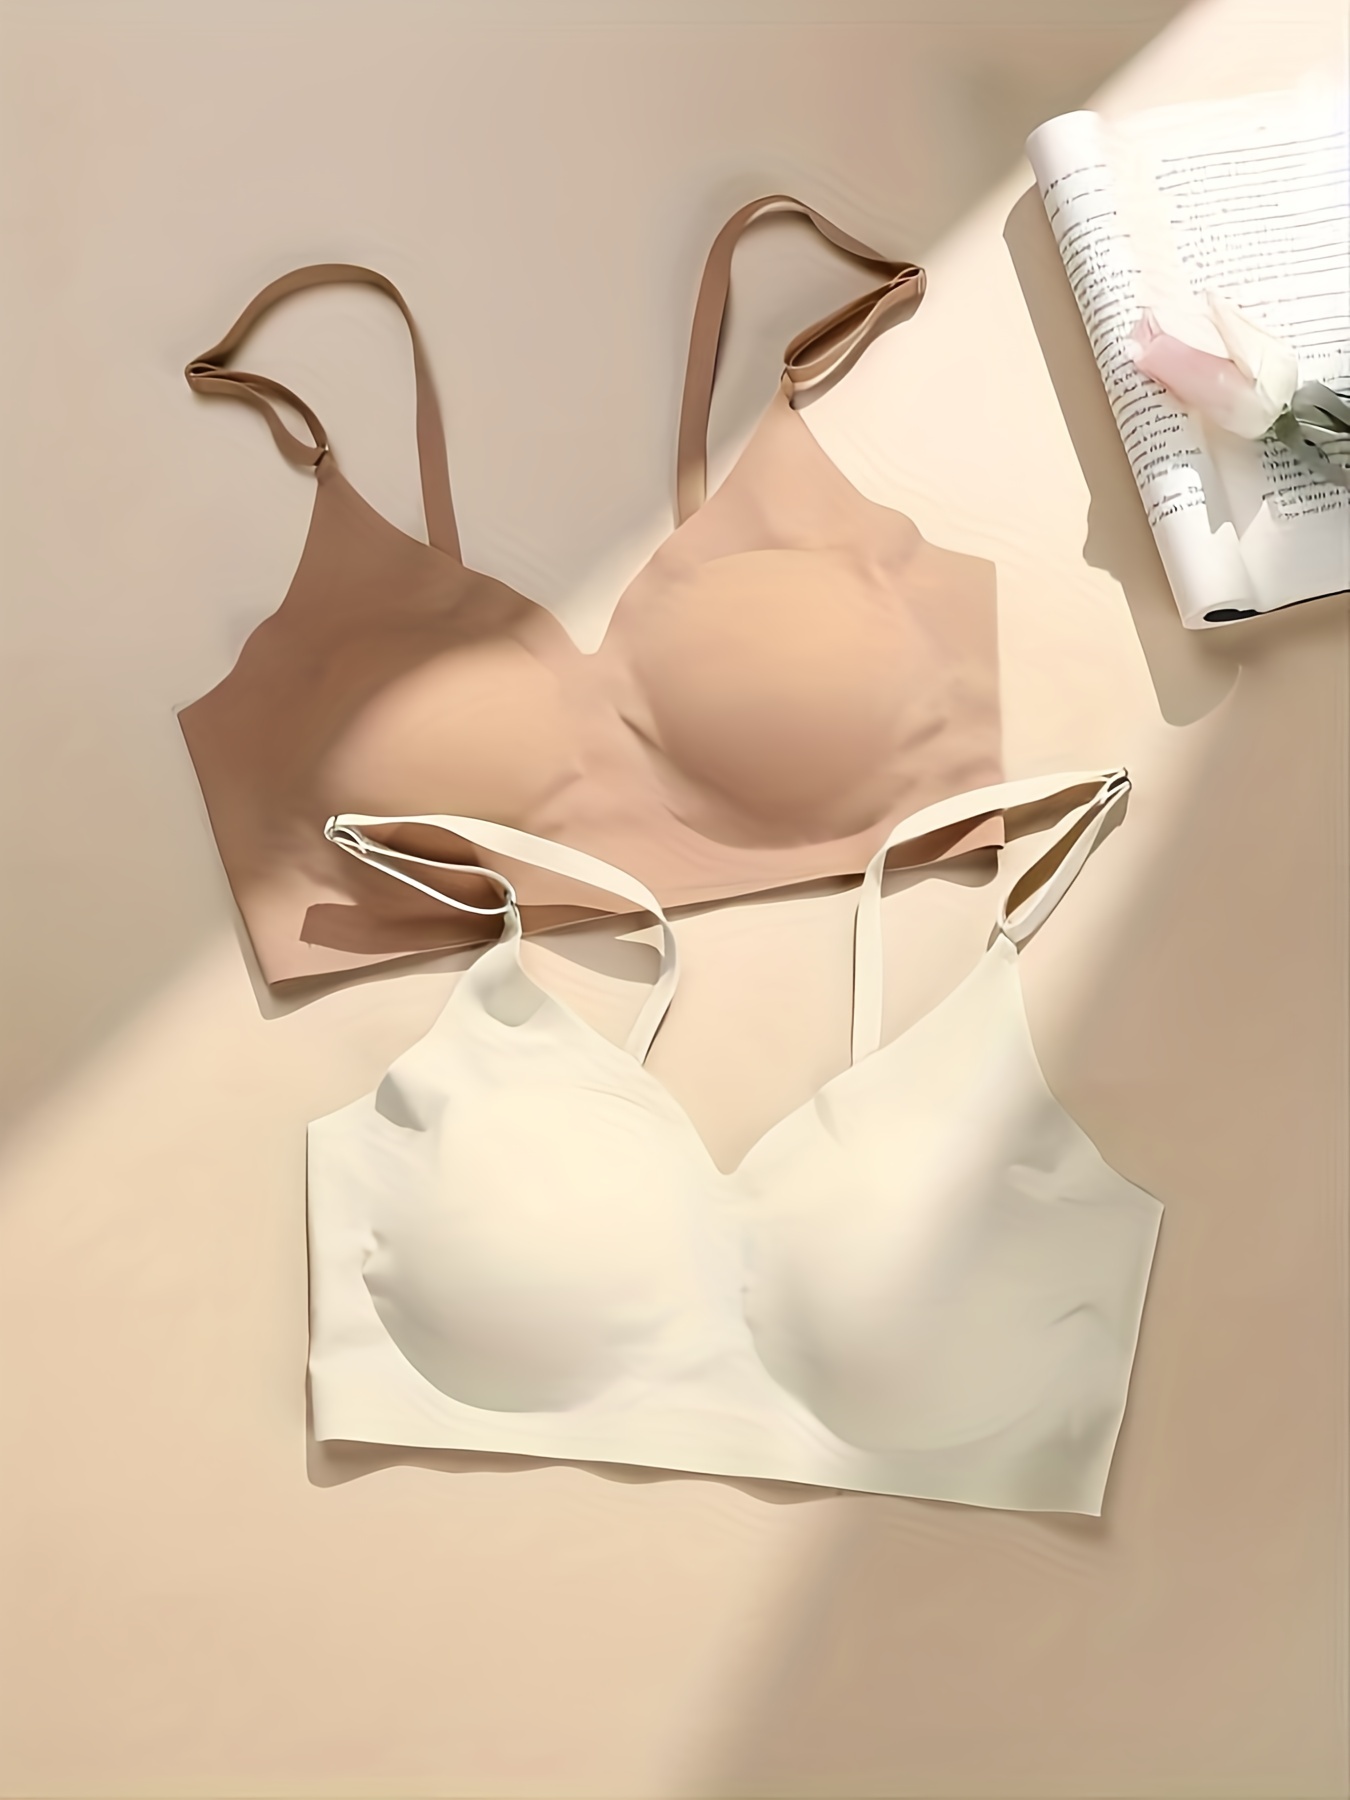 Stay comfortable all day with UNIQLO's Beauty Light Wireless Bra